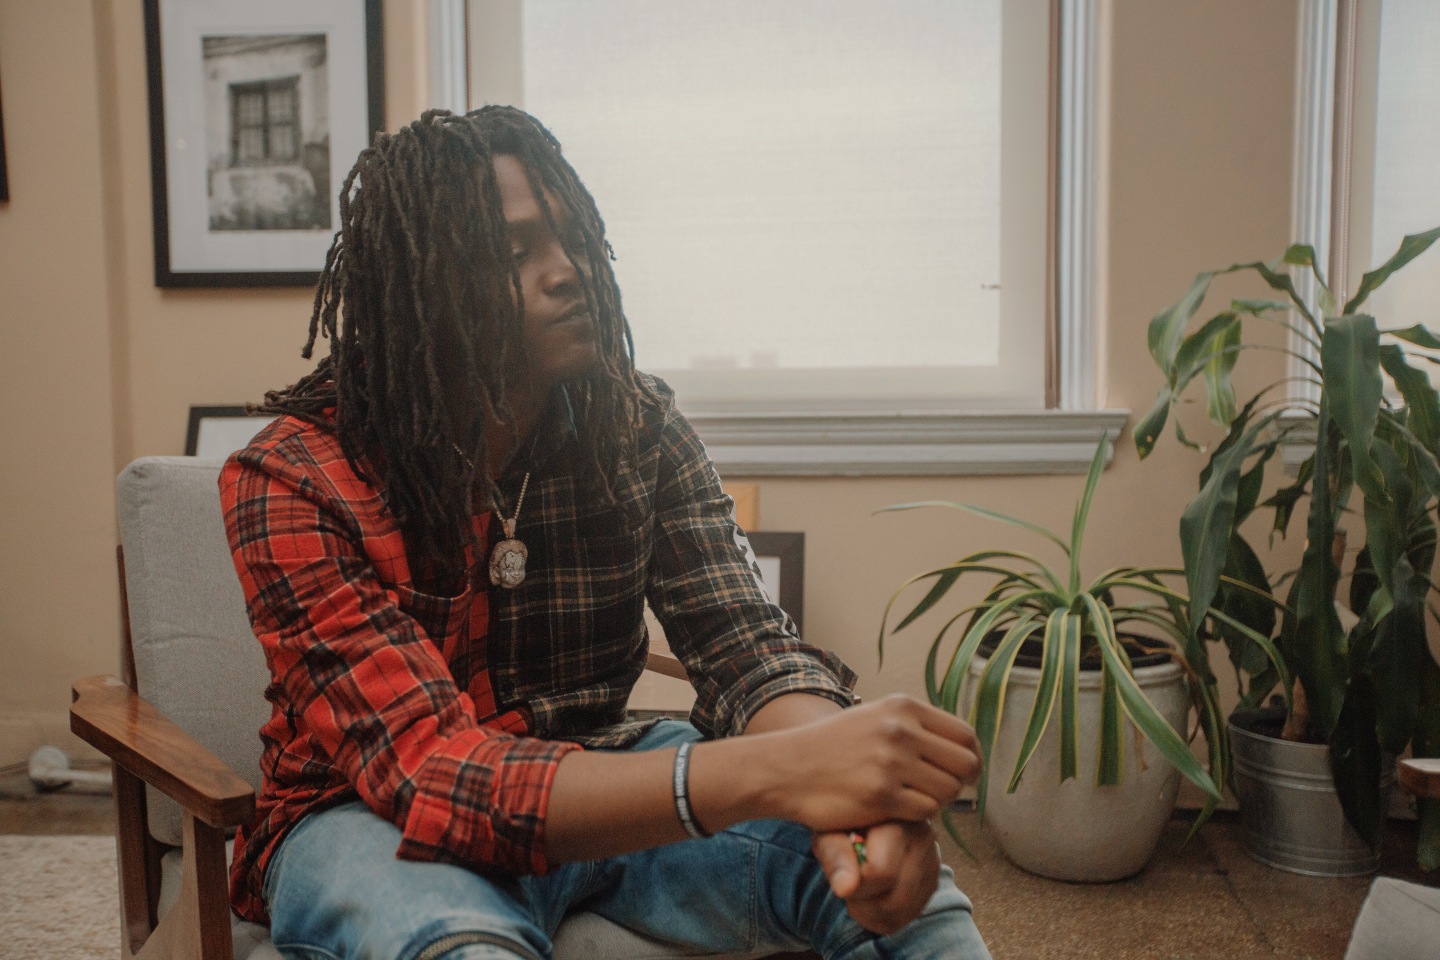 The FADER Interview with Young Nudy, the people’s champ of Atlanta